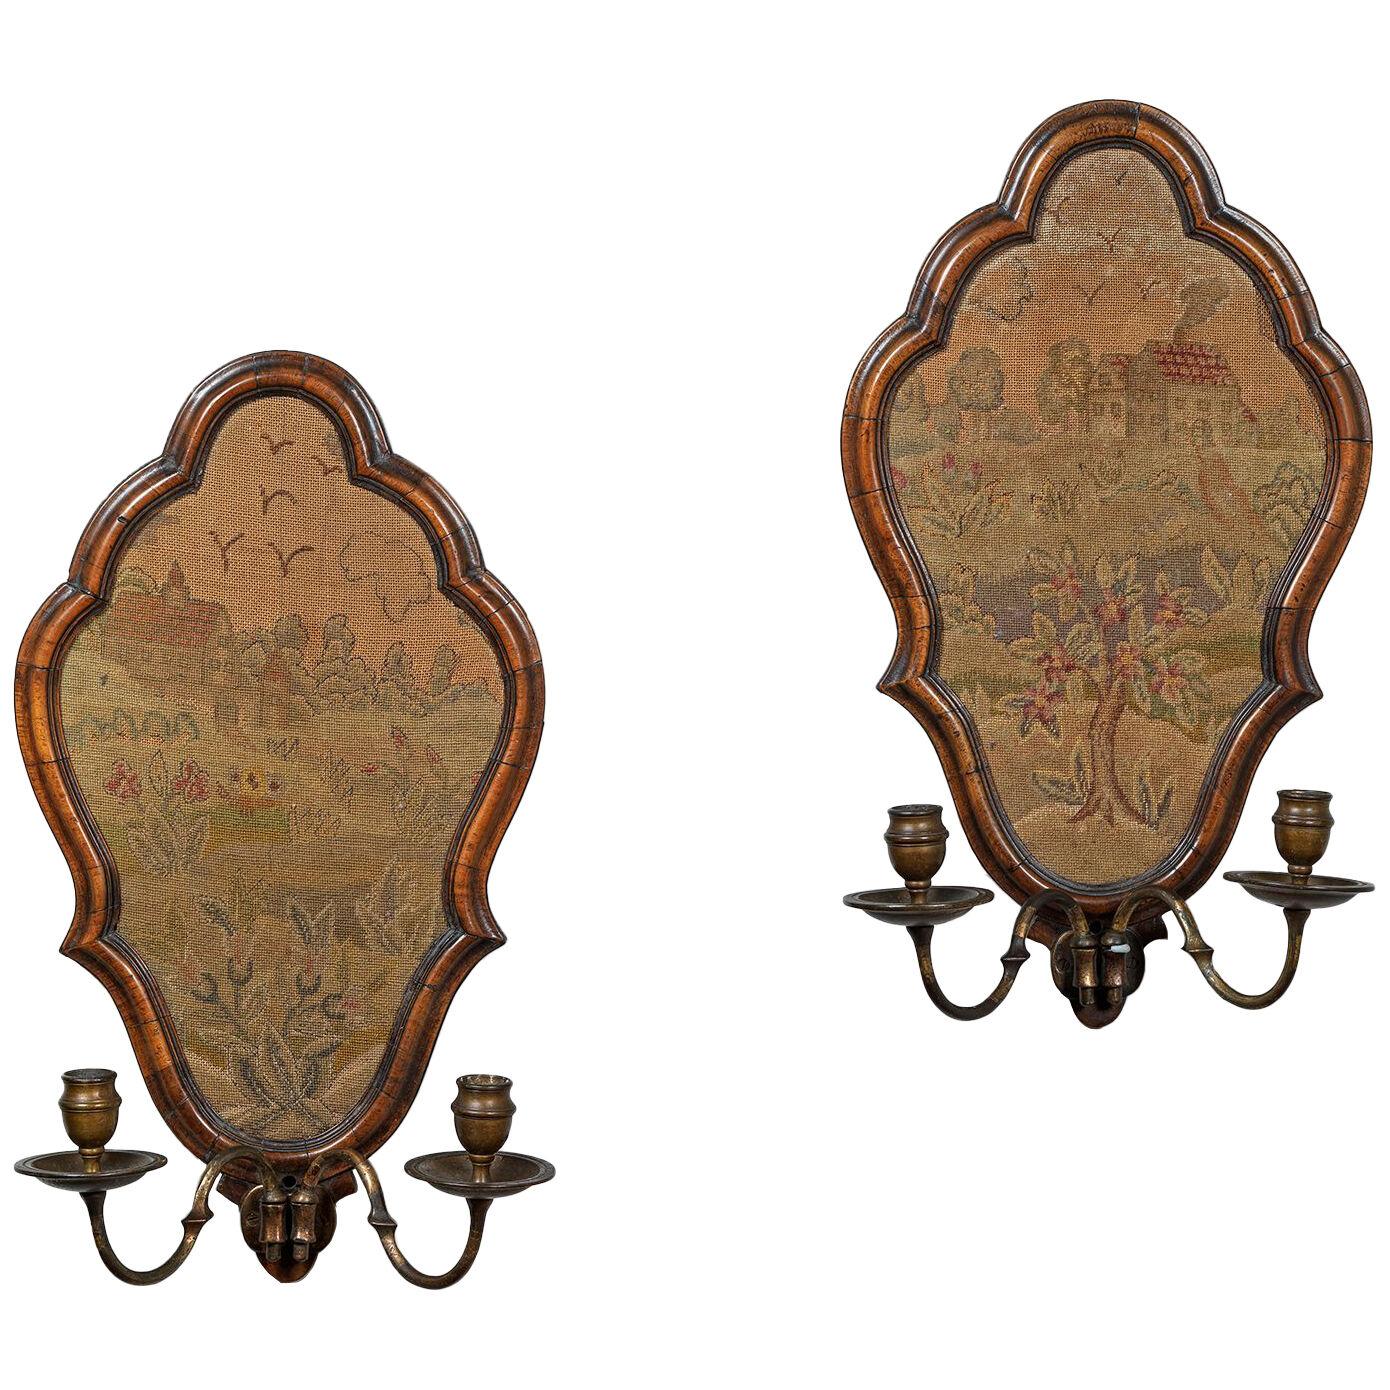 Pair of Queen Anne style wall sconces